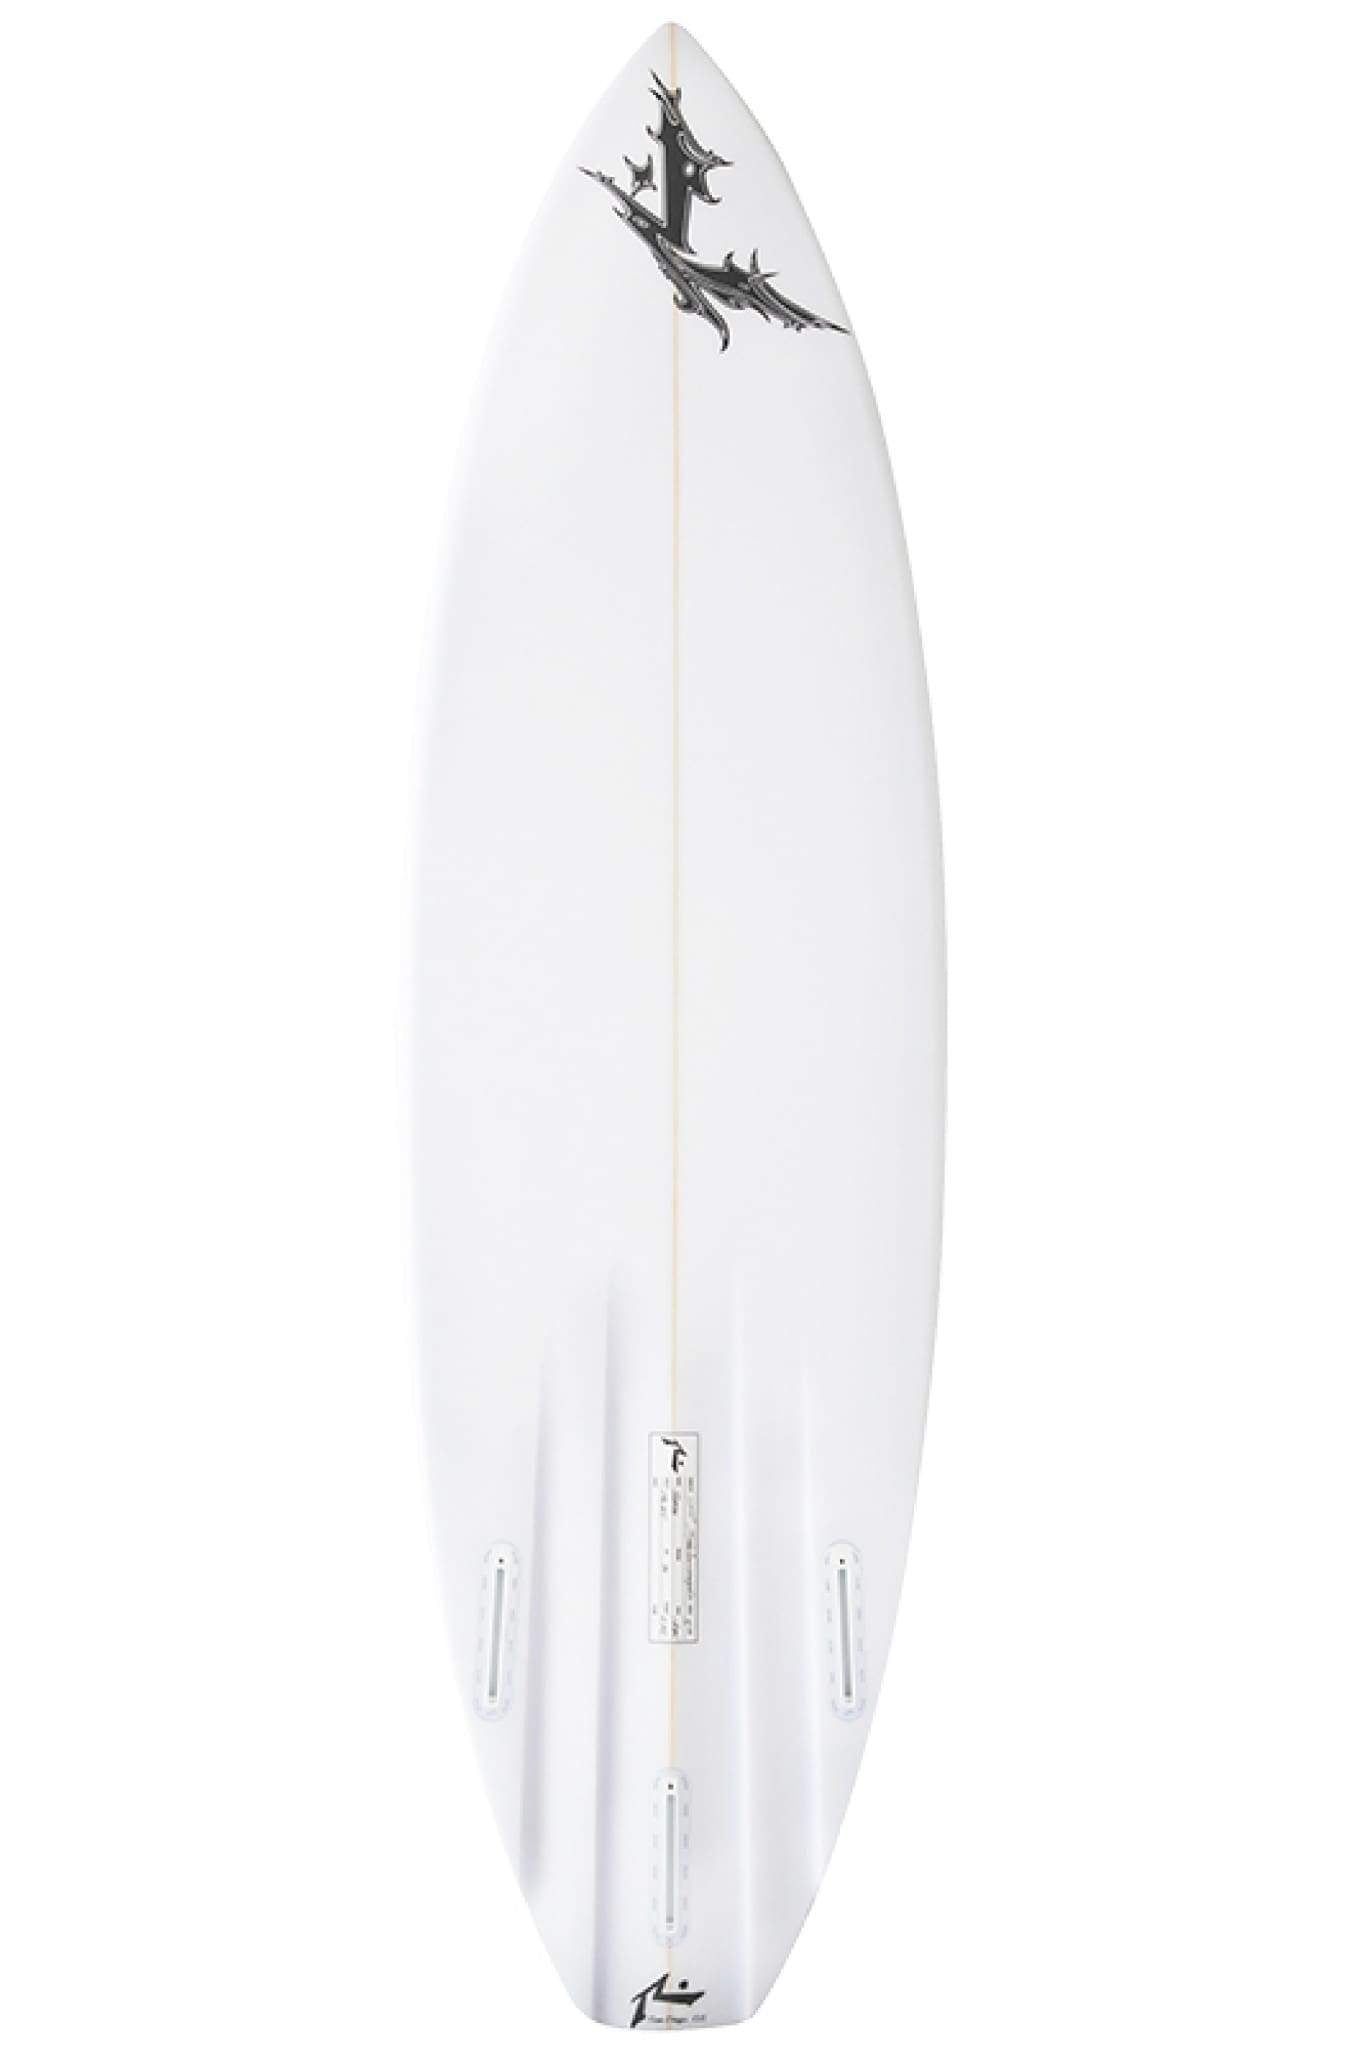 The Blade-Surfboards-Rusty Surfboards ME